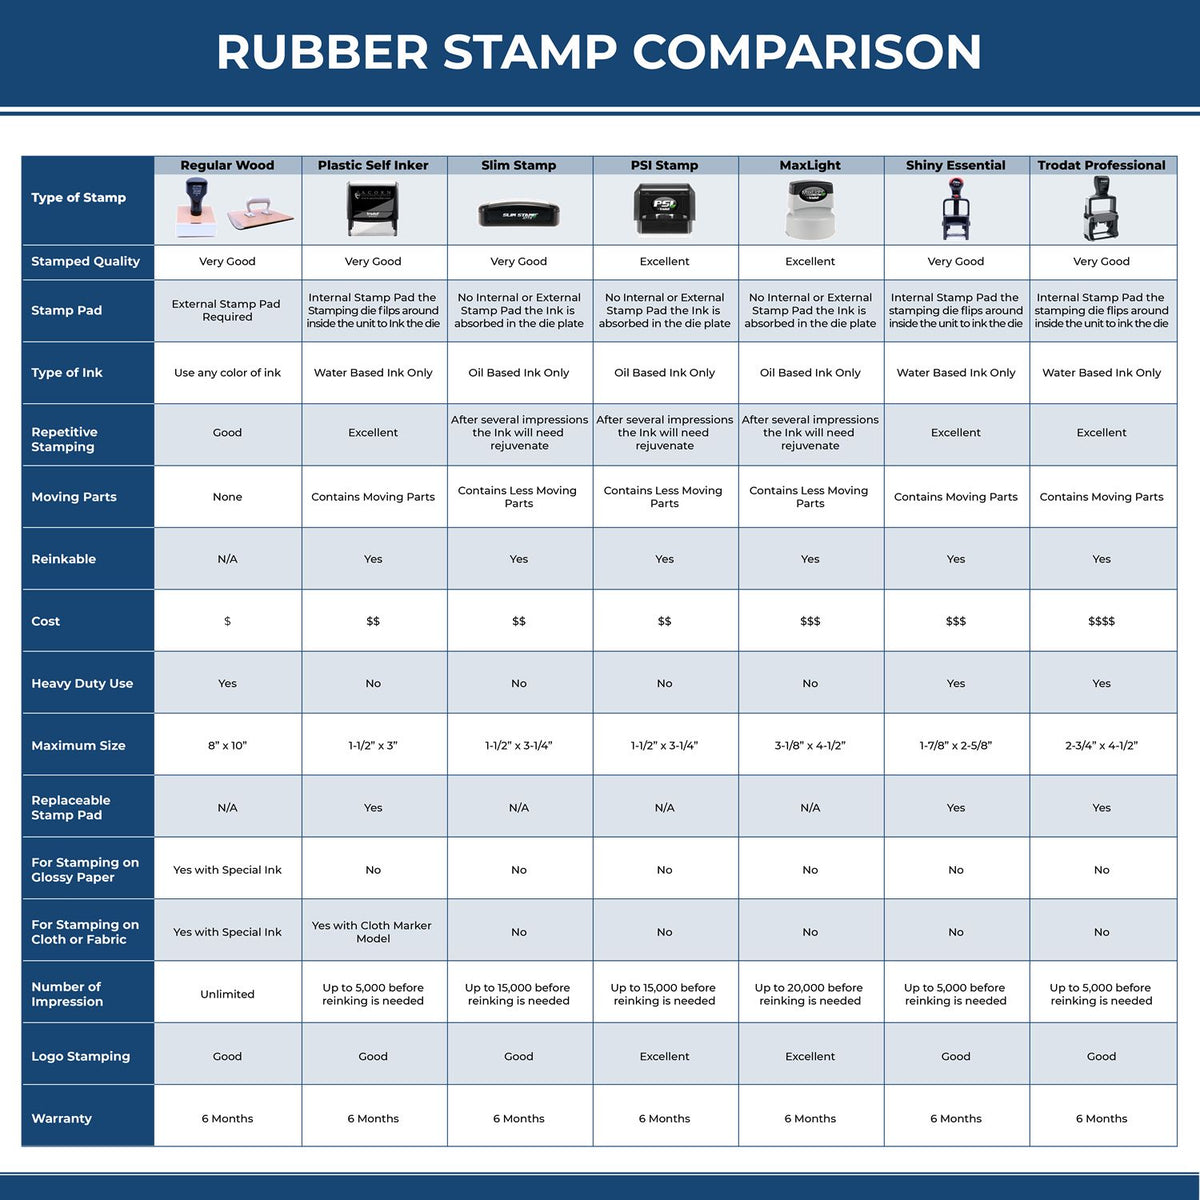 A comparison chart for the different types of mount models available for the PSI Delaware Notary Stamp.